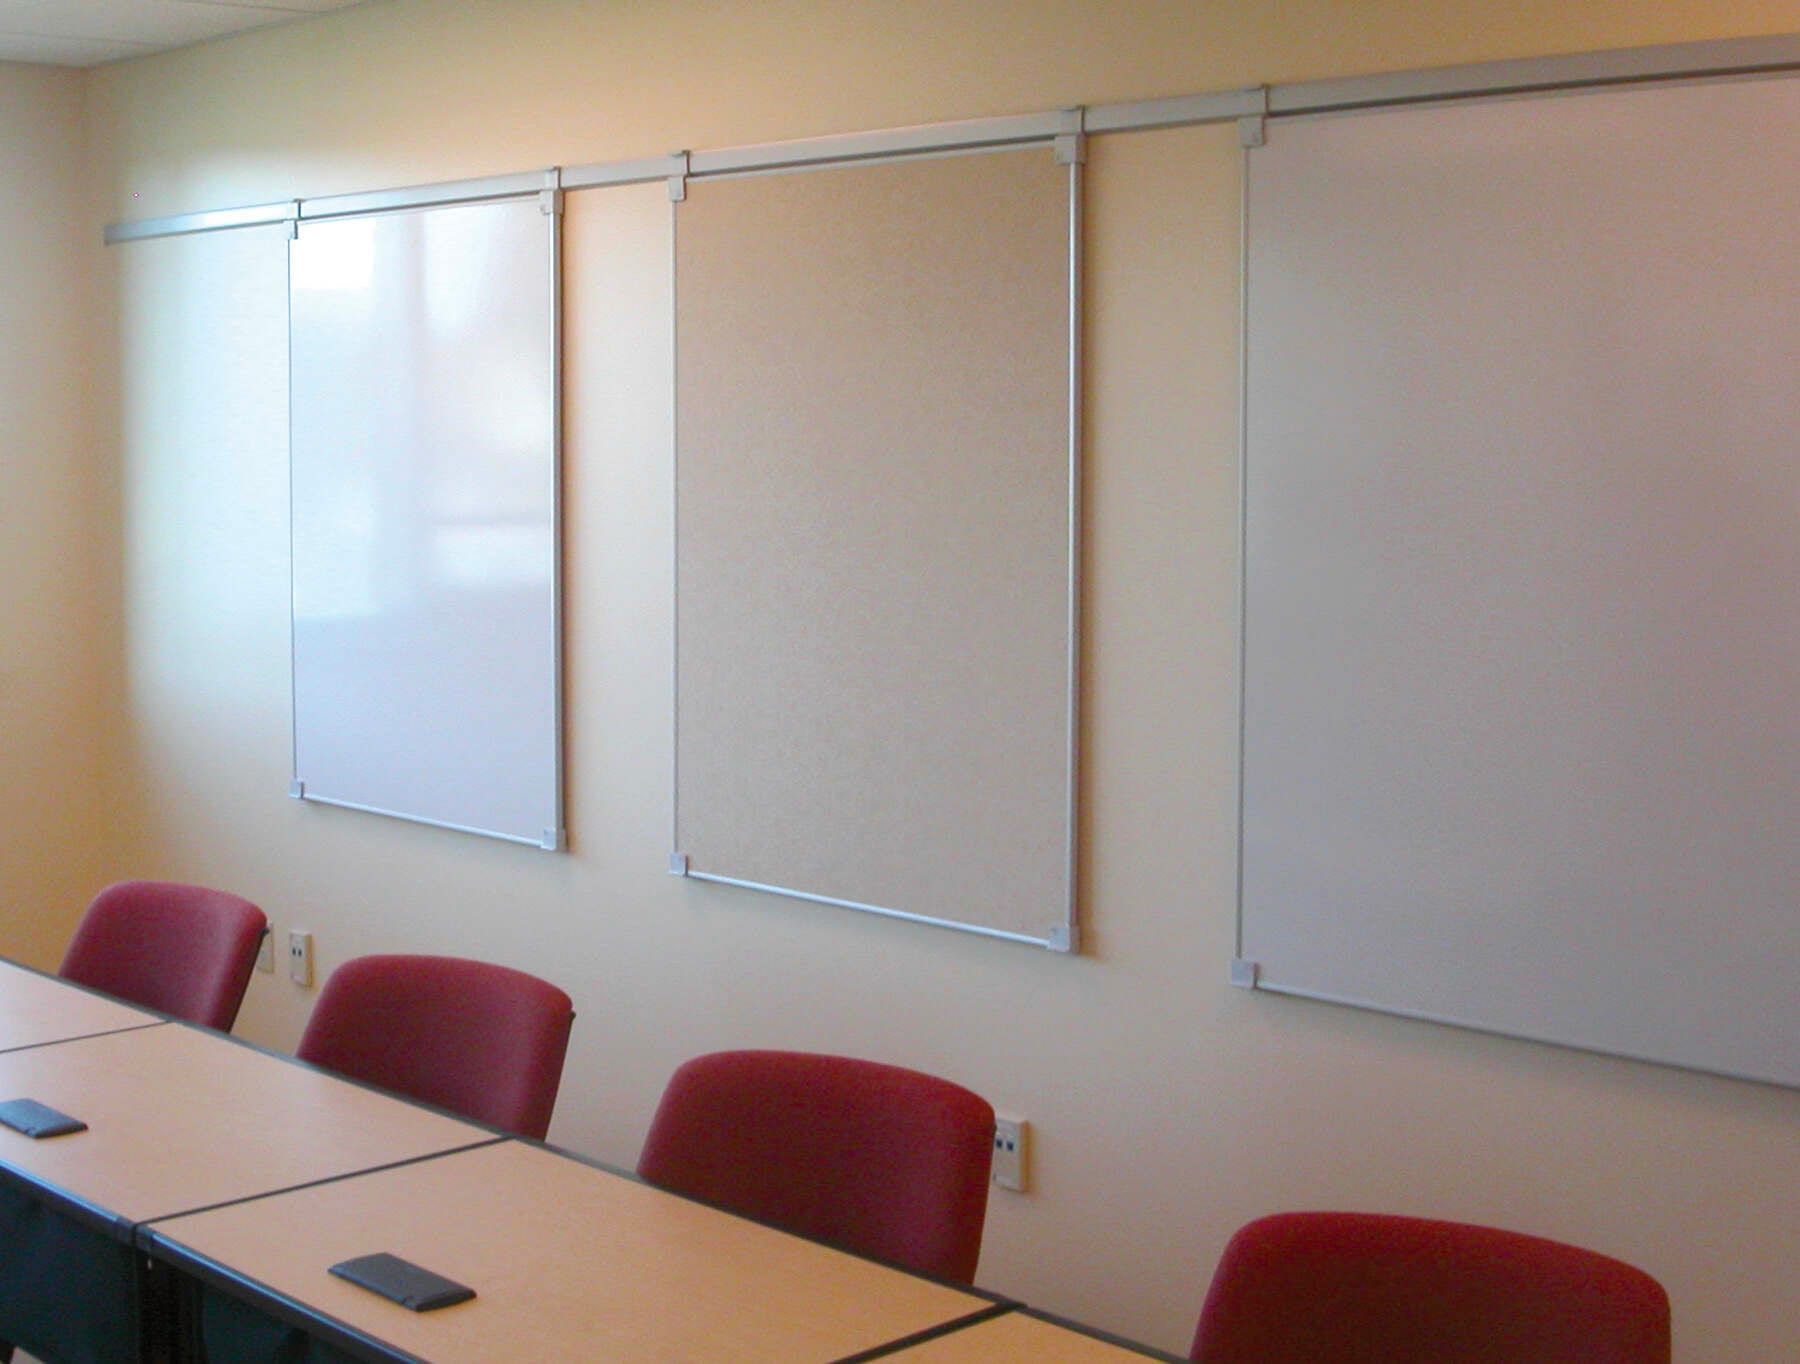 Claridge Products Office Space Design Conference Room Whiteboard Wall